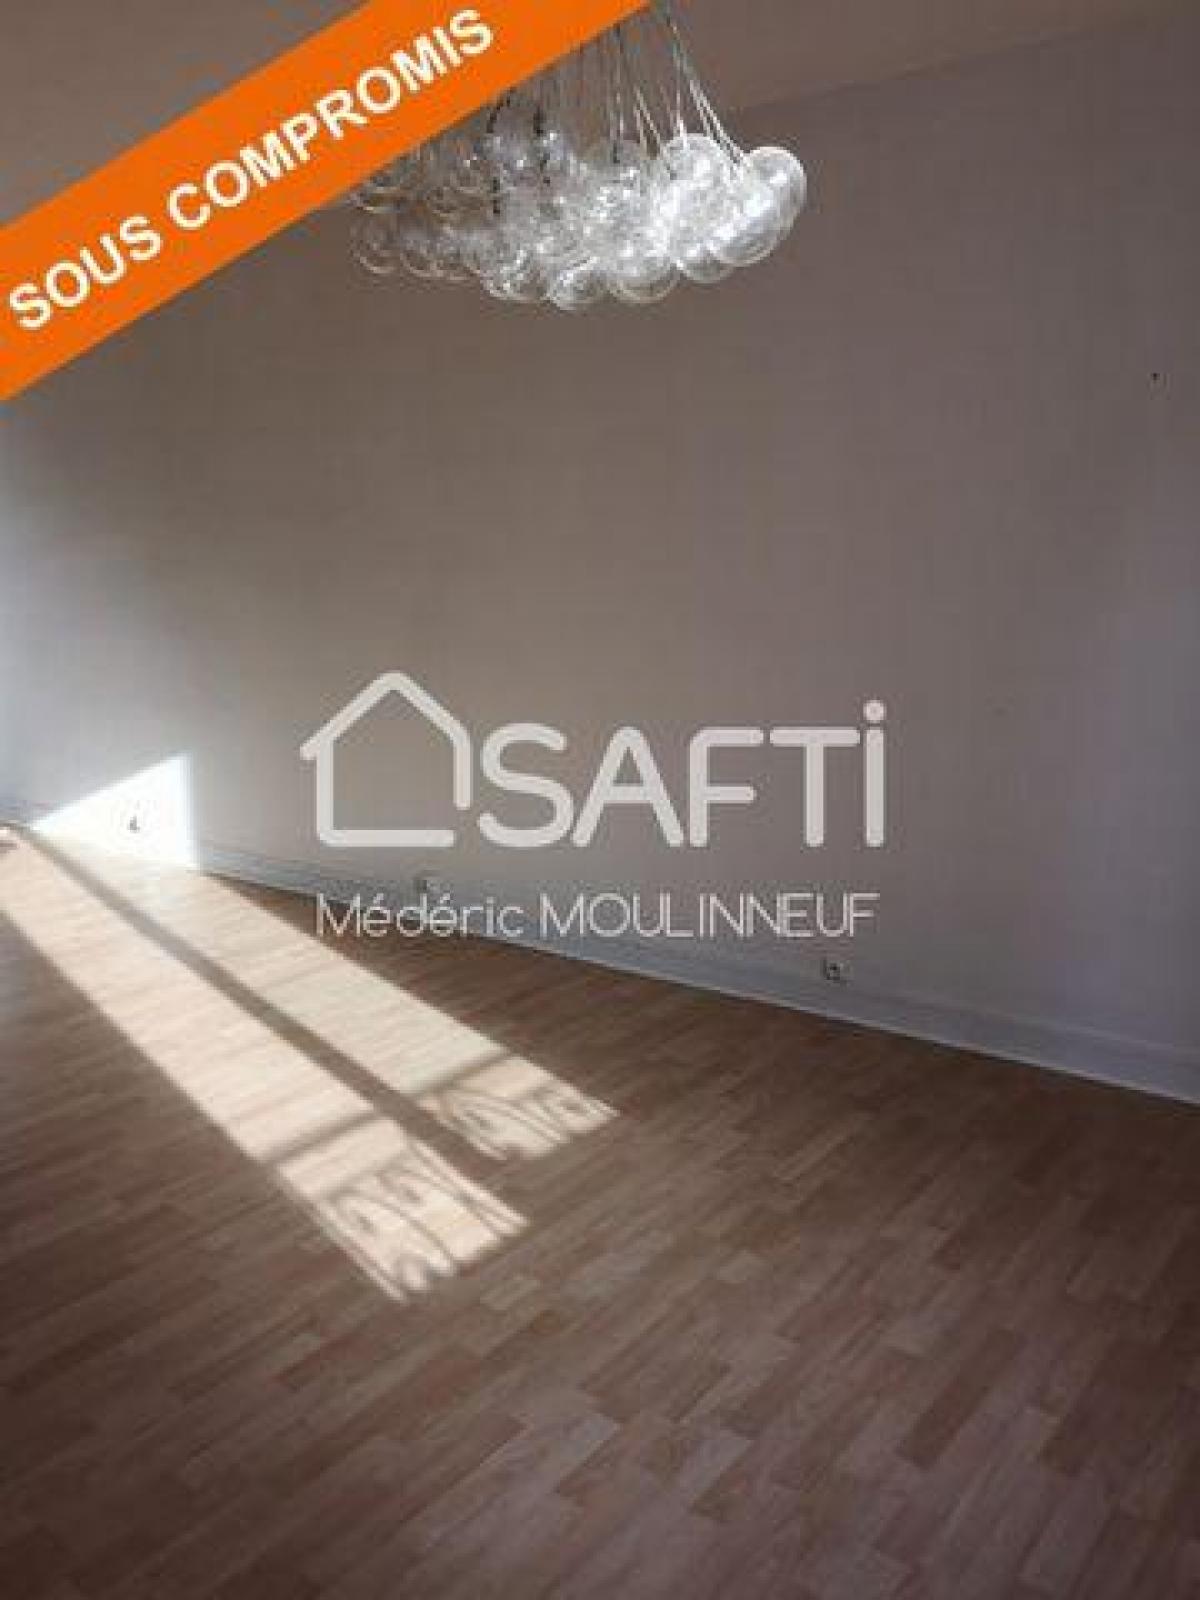 Picture of Apartment For Sale in Tours, Touraine, France